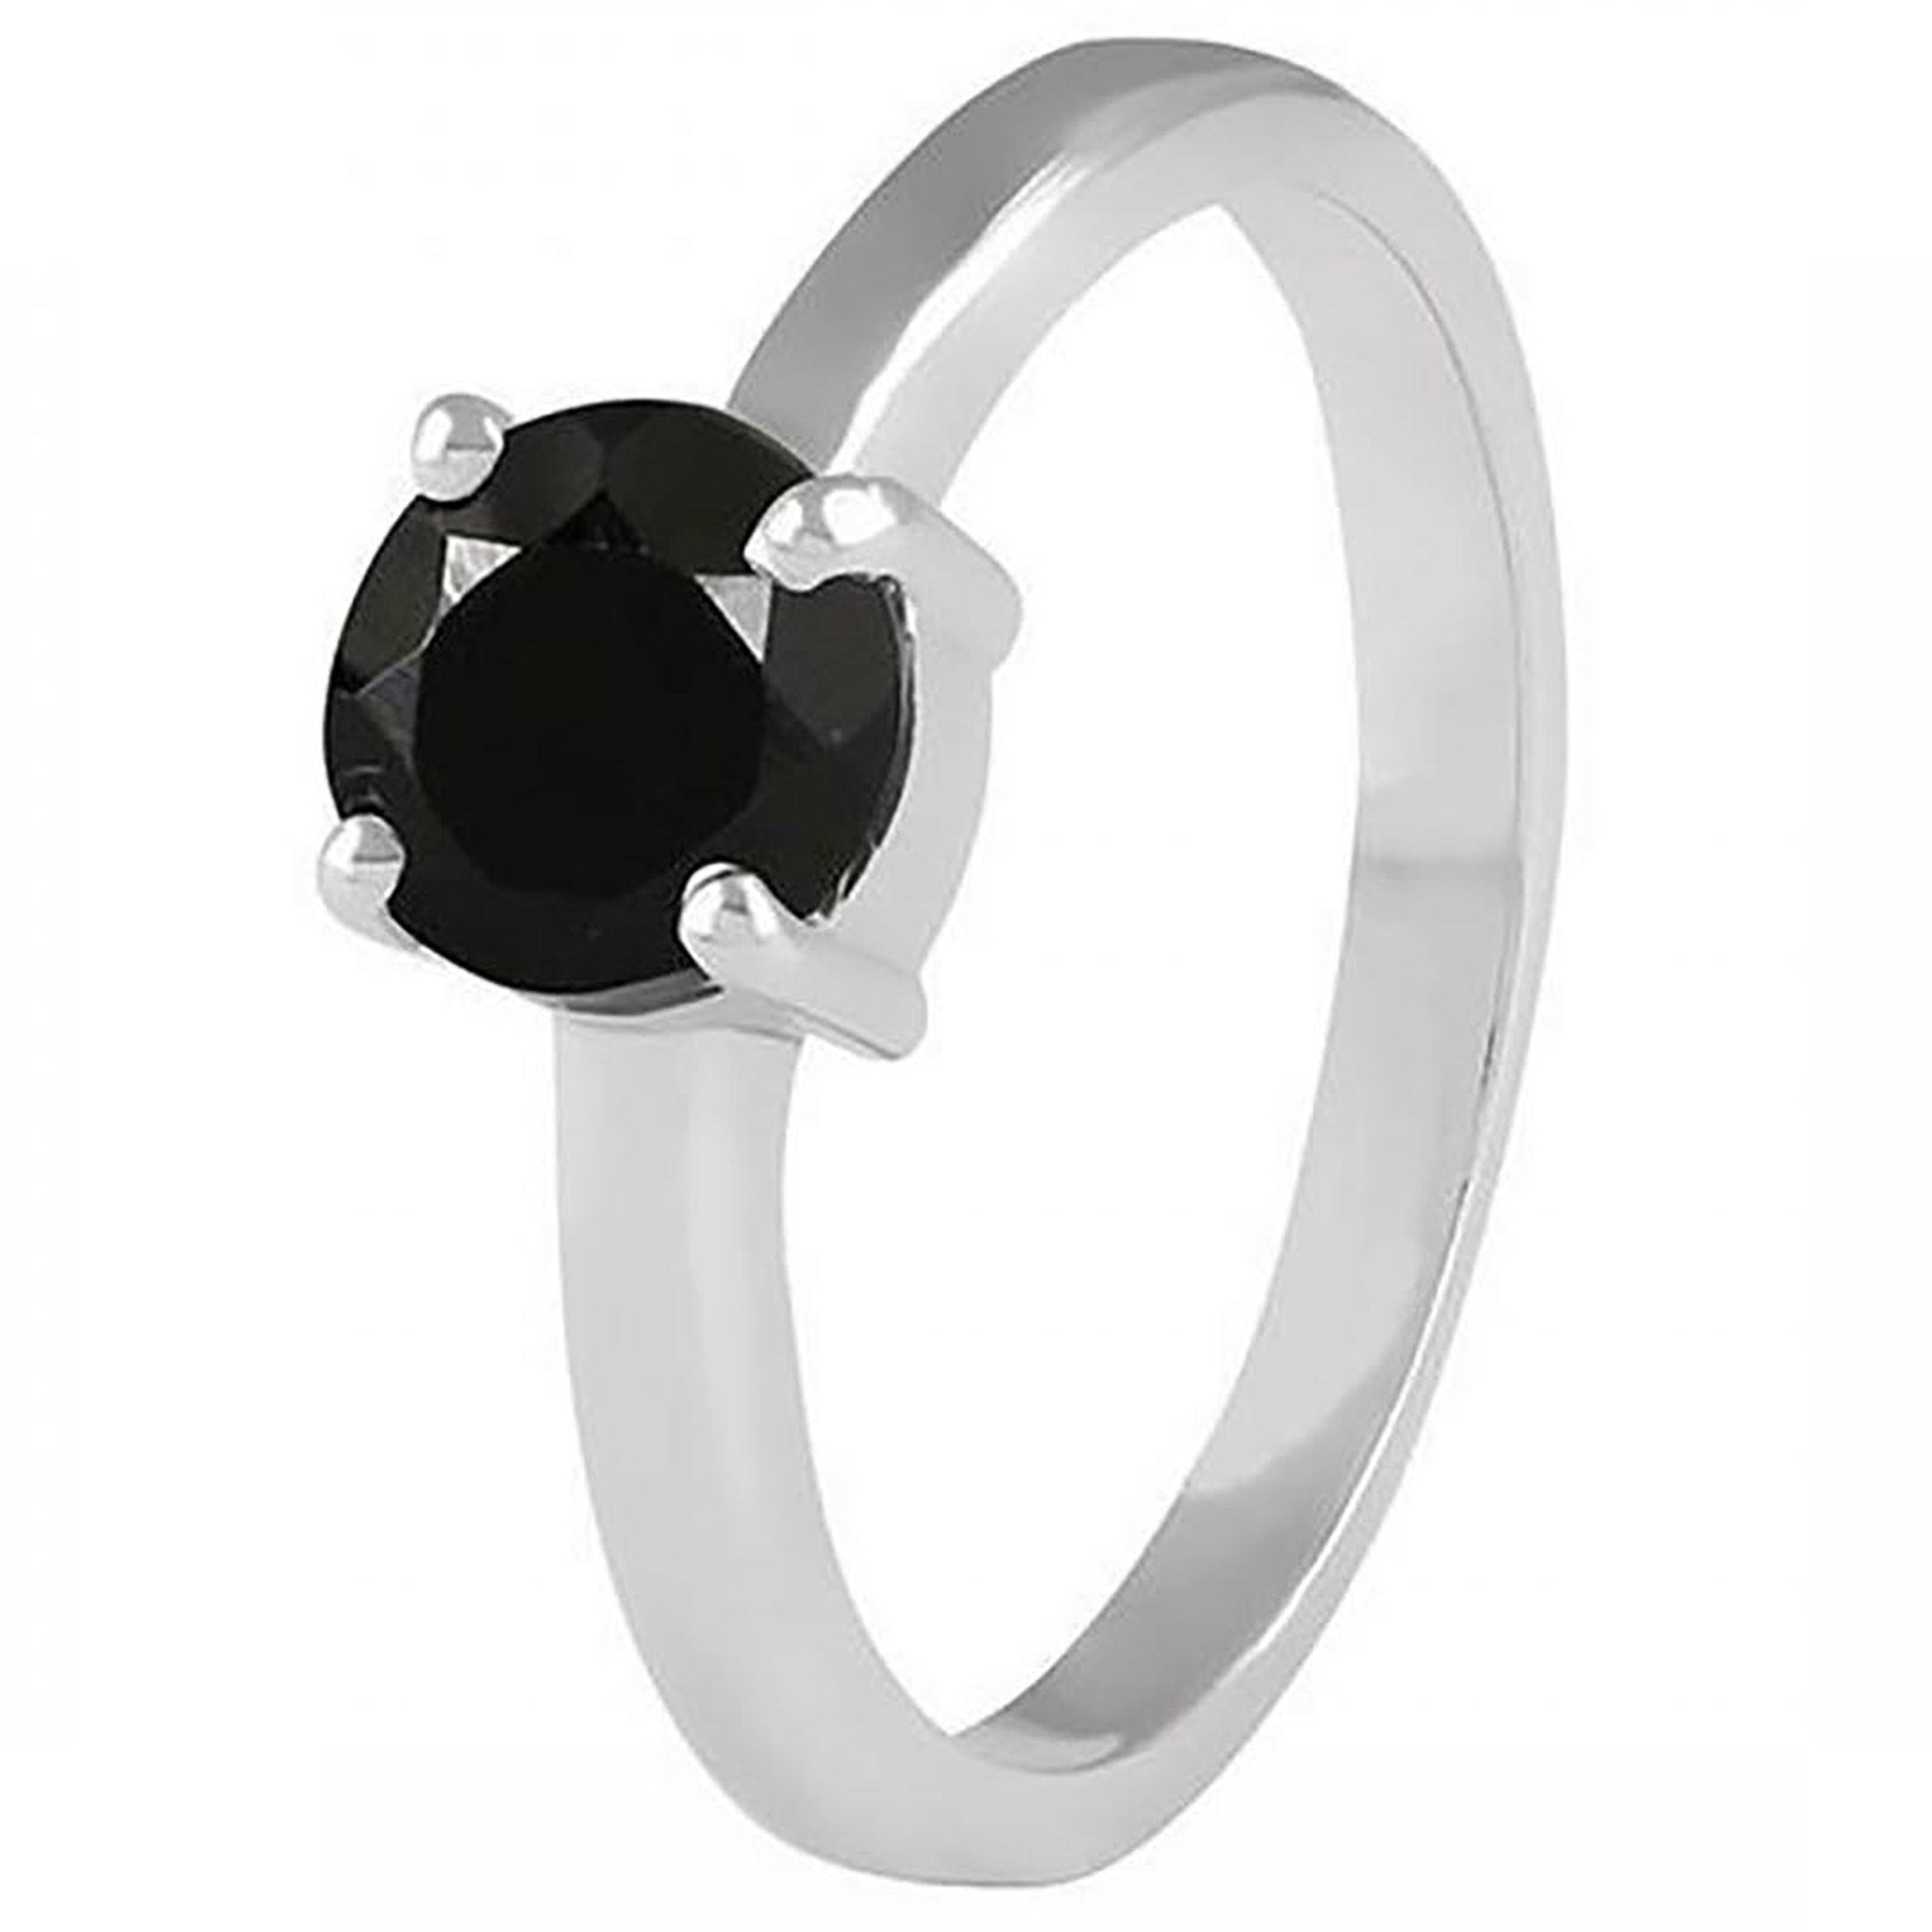 Faceted Round Black Onyx Ring